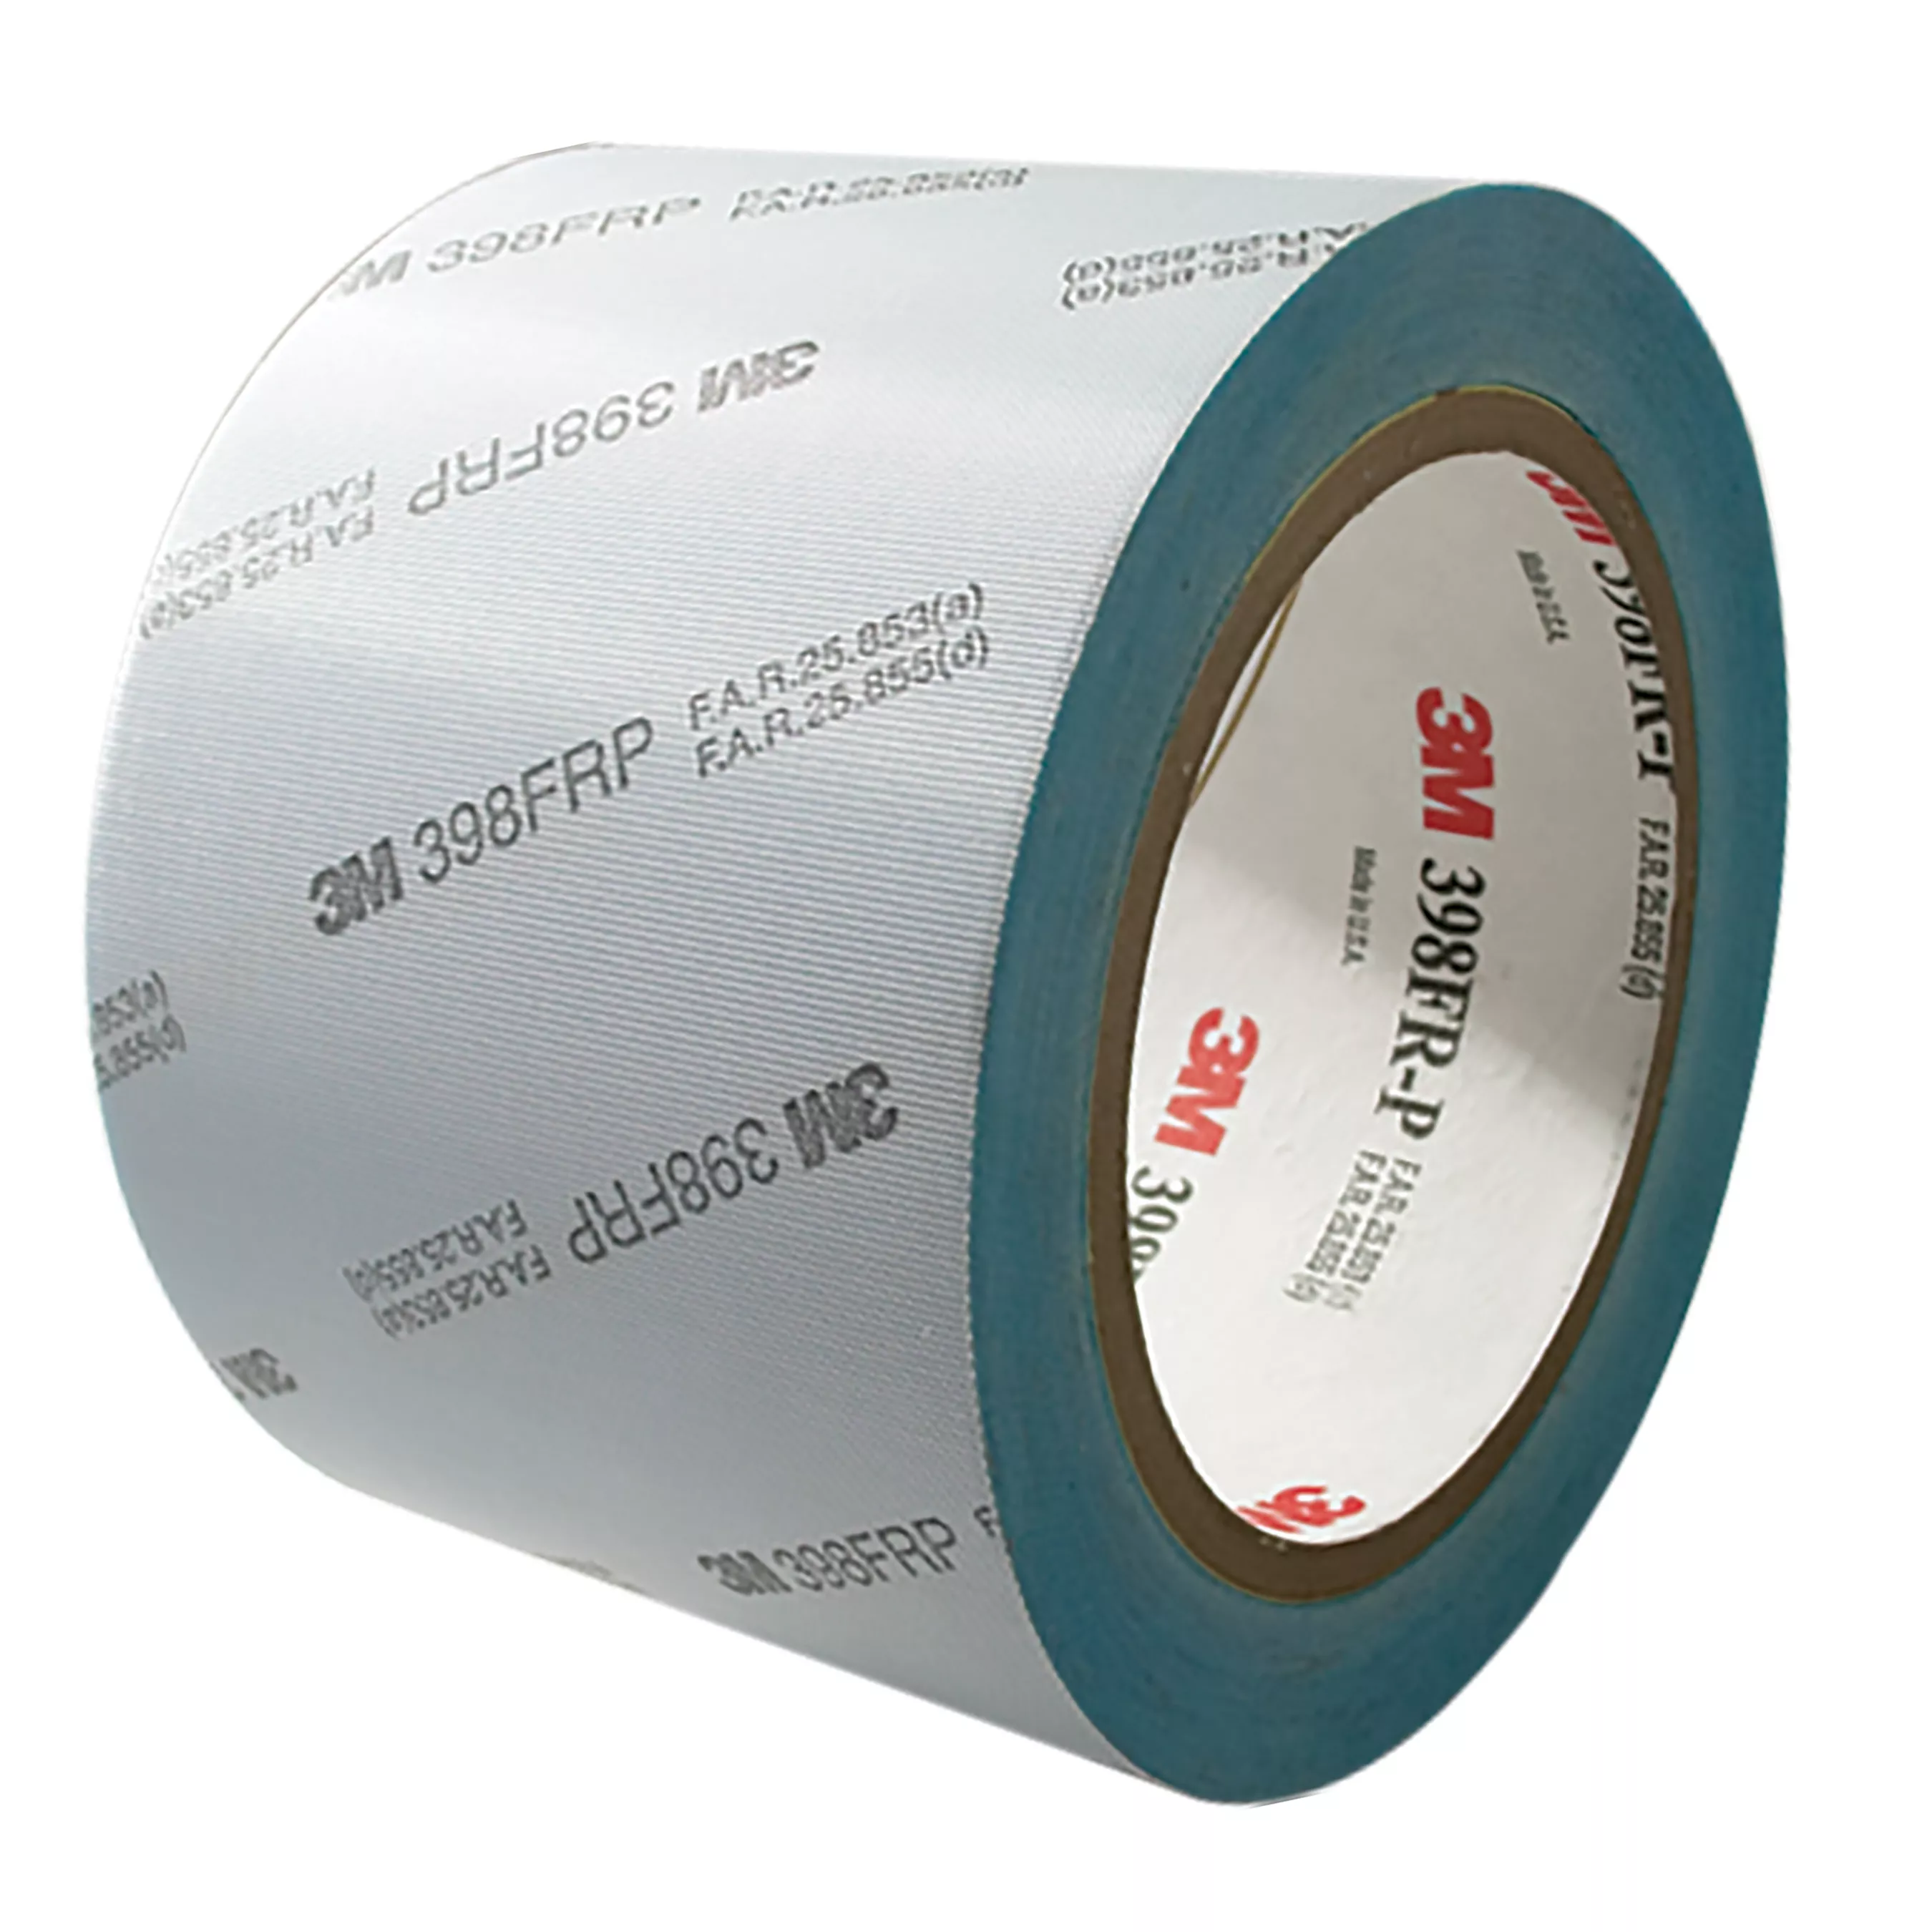 3M™ Glass Cloth Tape 398FRP, White, 3 in x 36 yd, 7 mil, 12 Roll/Case